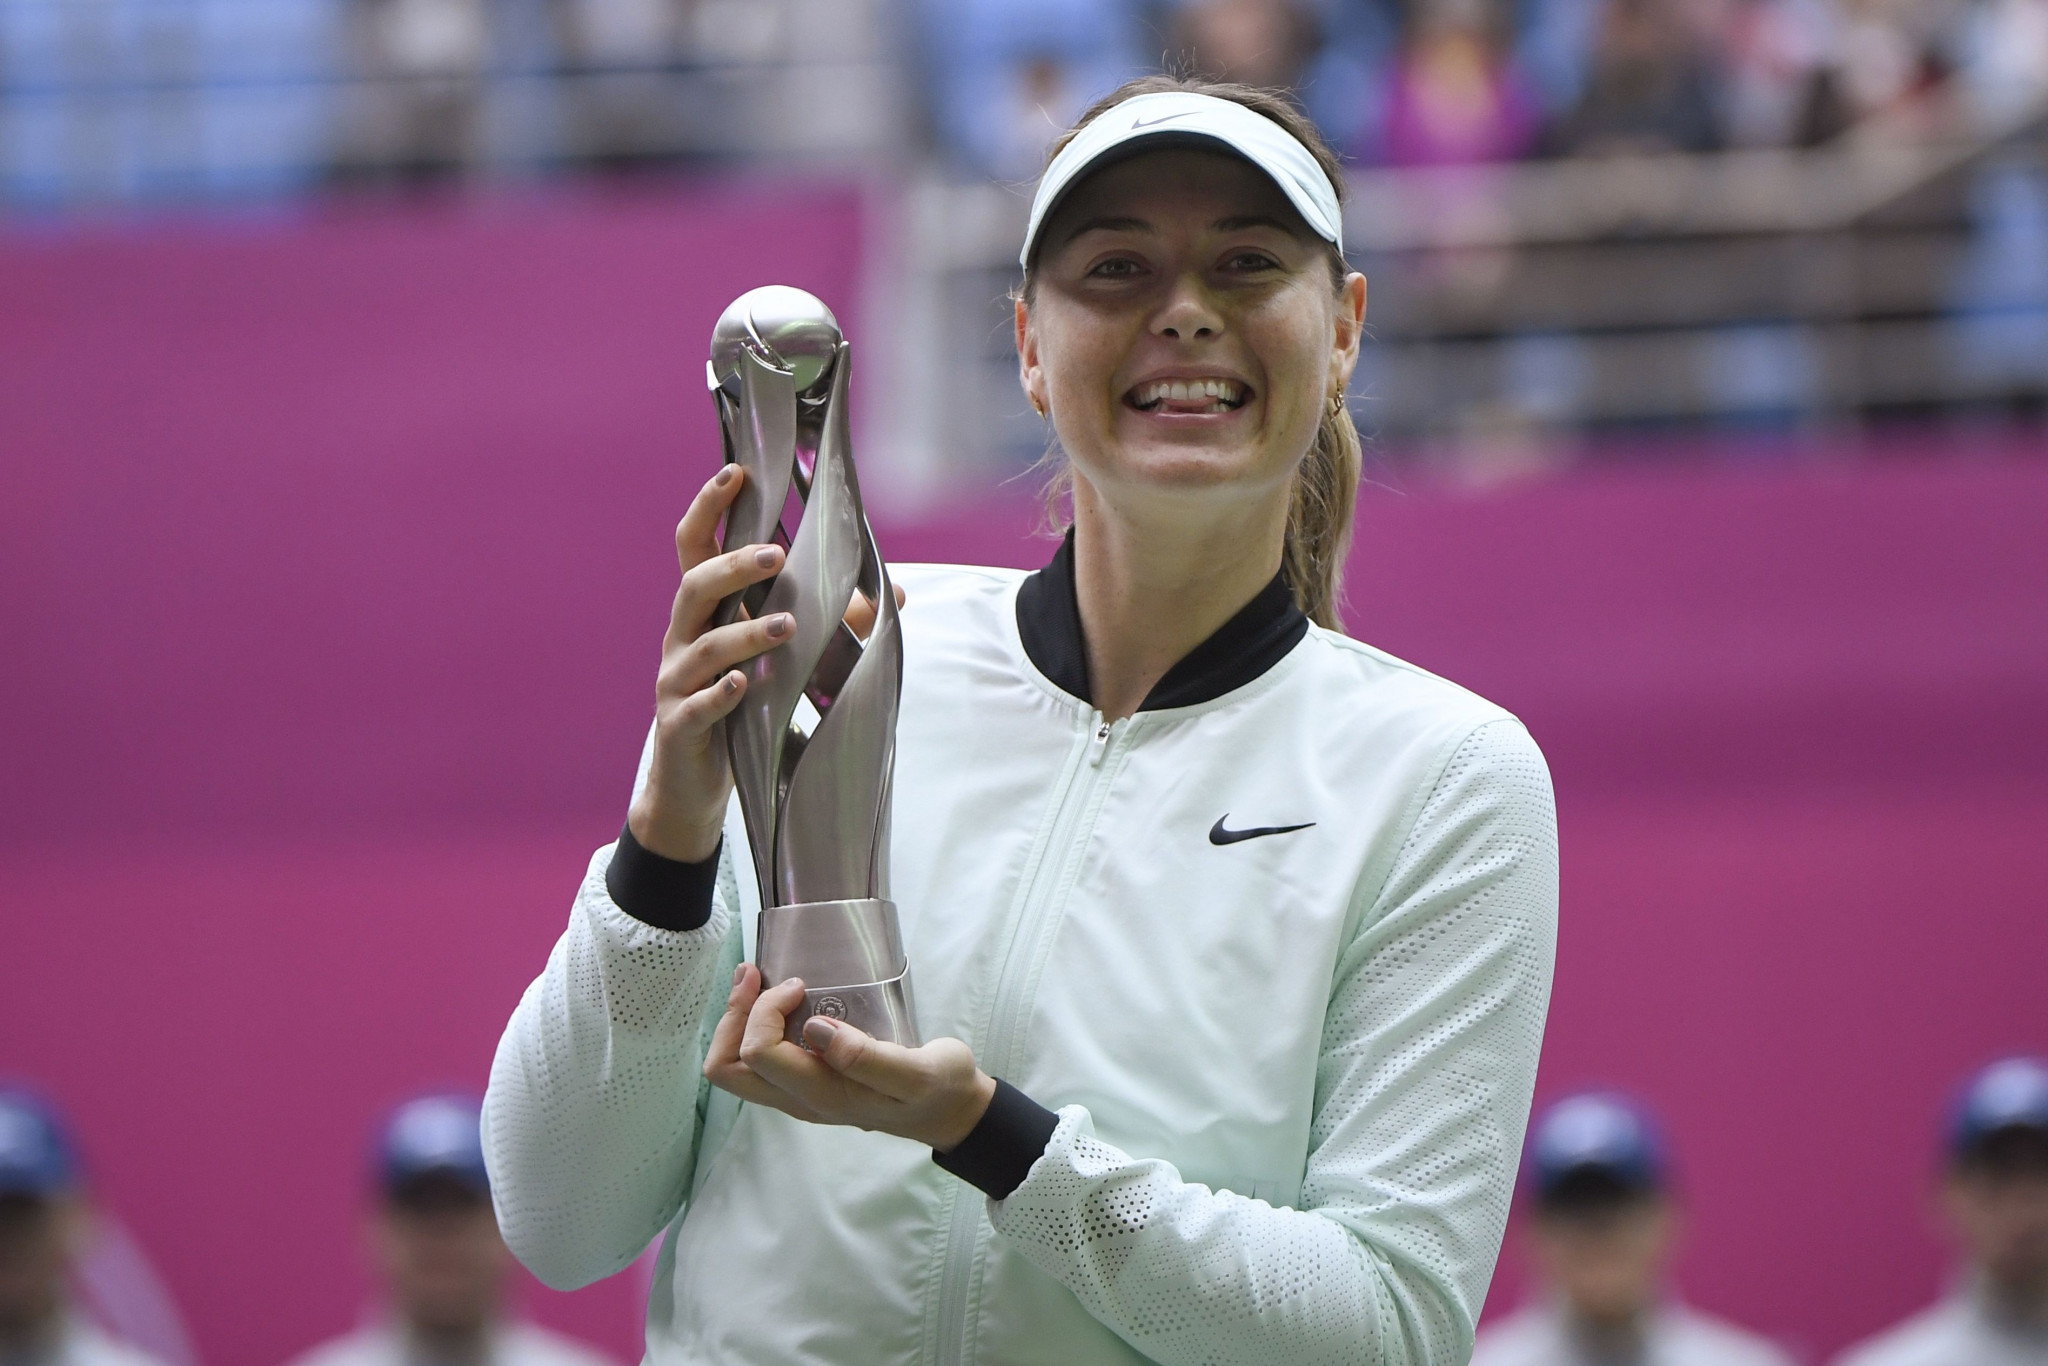 Sharapova claims first tournament victory since return from drugs ban